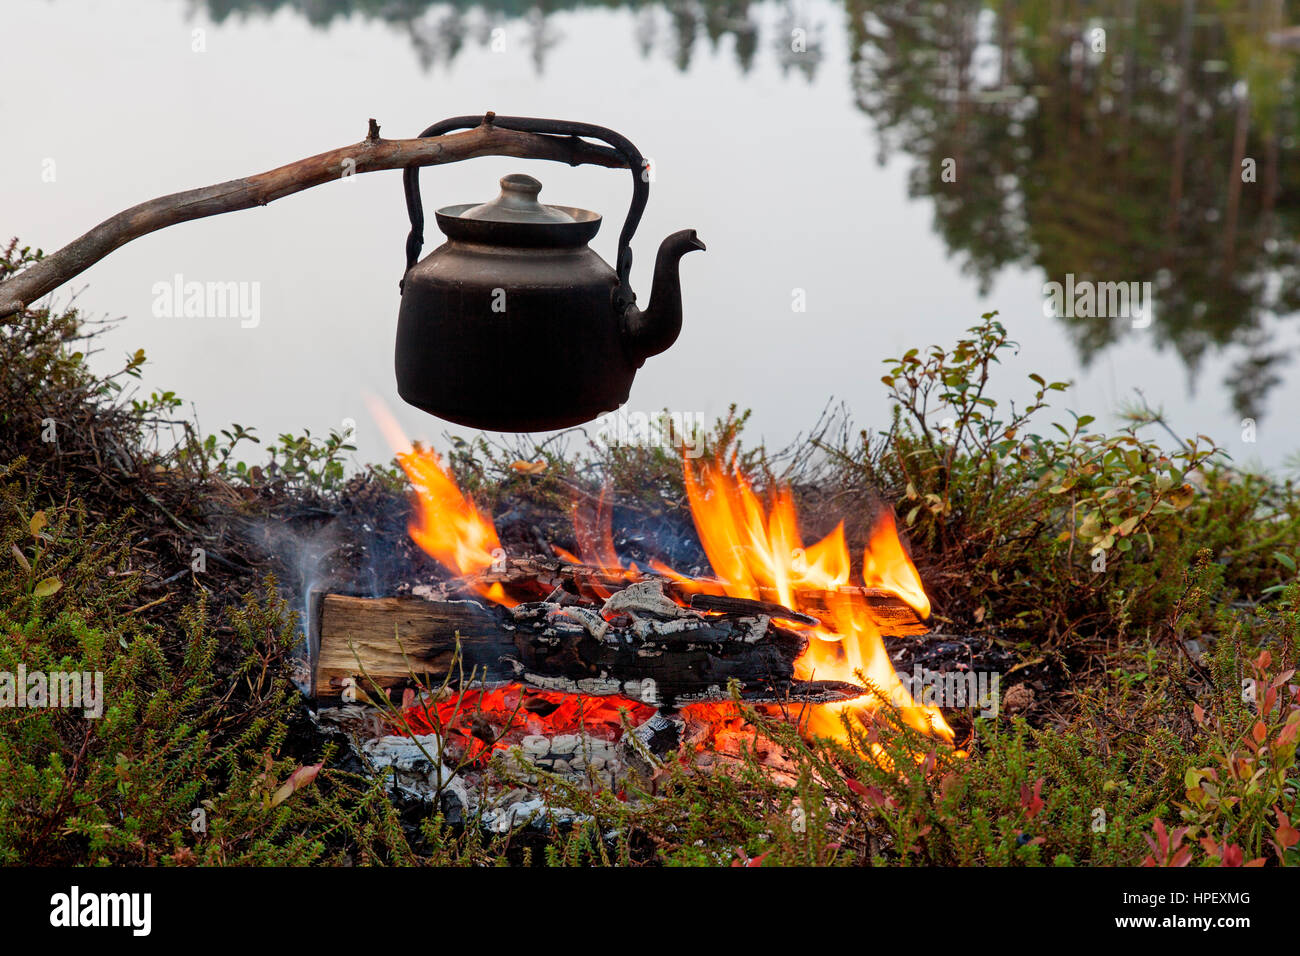 https://c8.alamy.com/comp/HPEXMG/blackened-tin-kettle-boiling-water-over-flames-from-campfire-during-HPEXMG.jpg